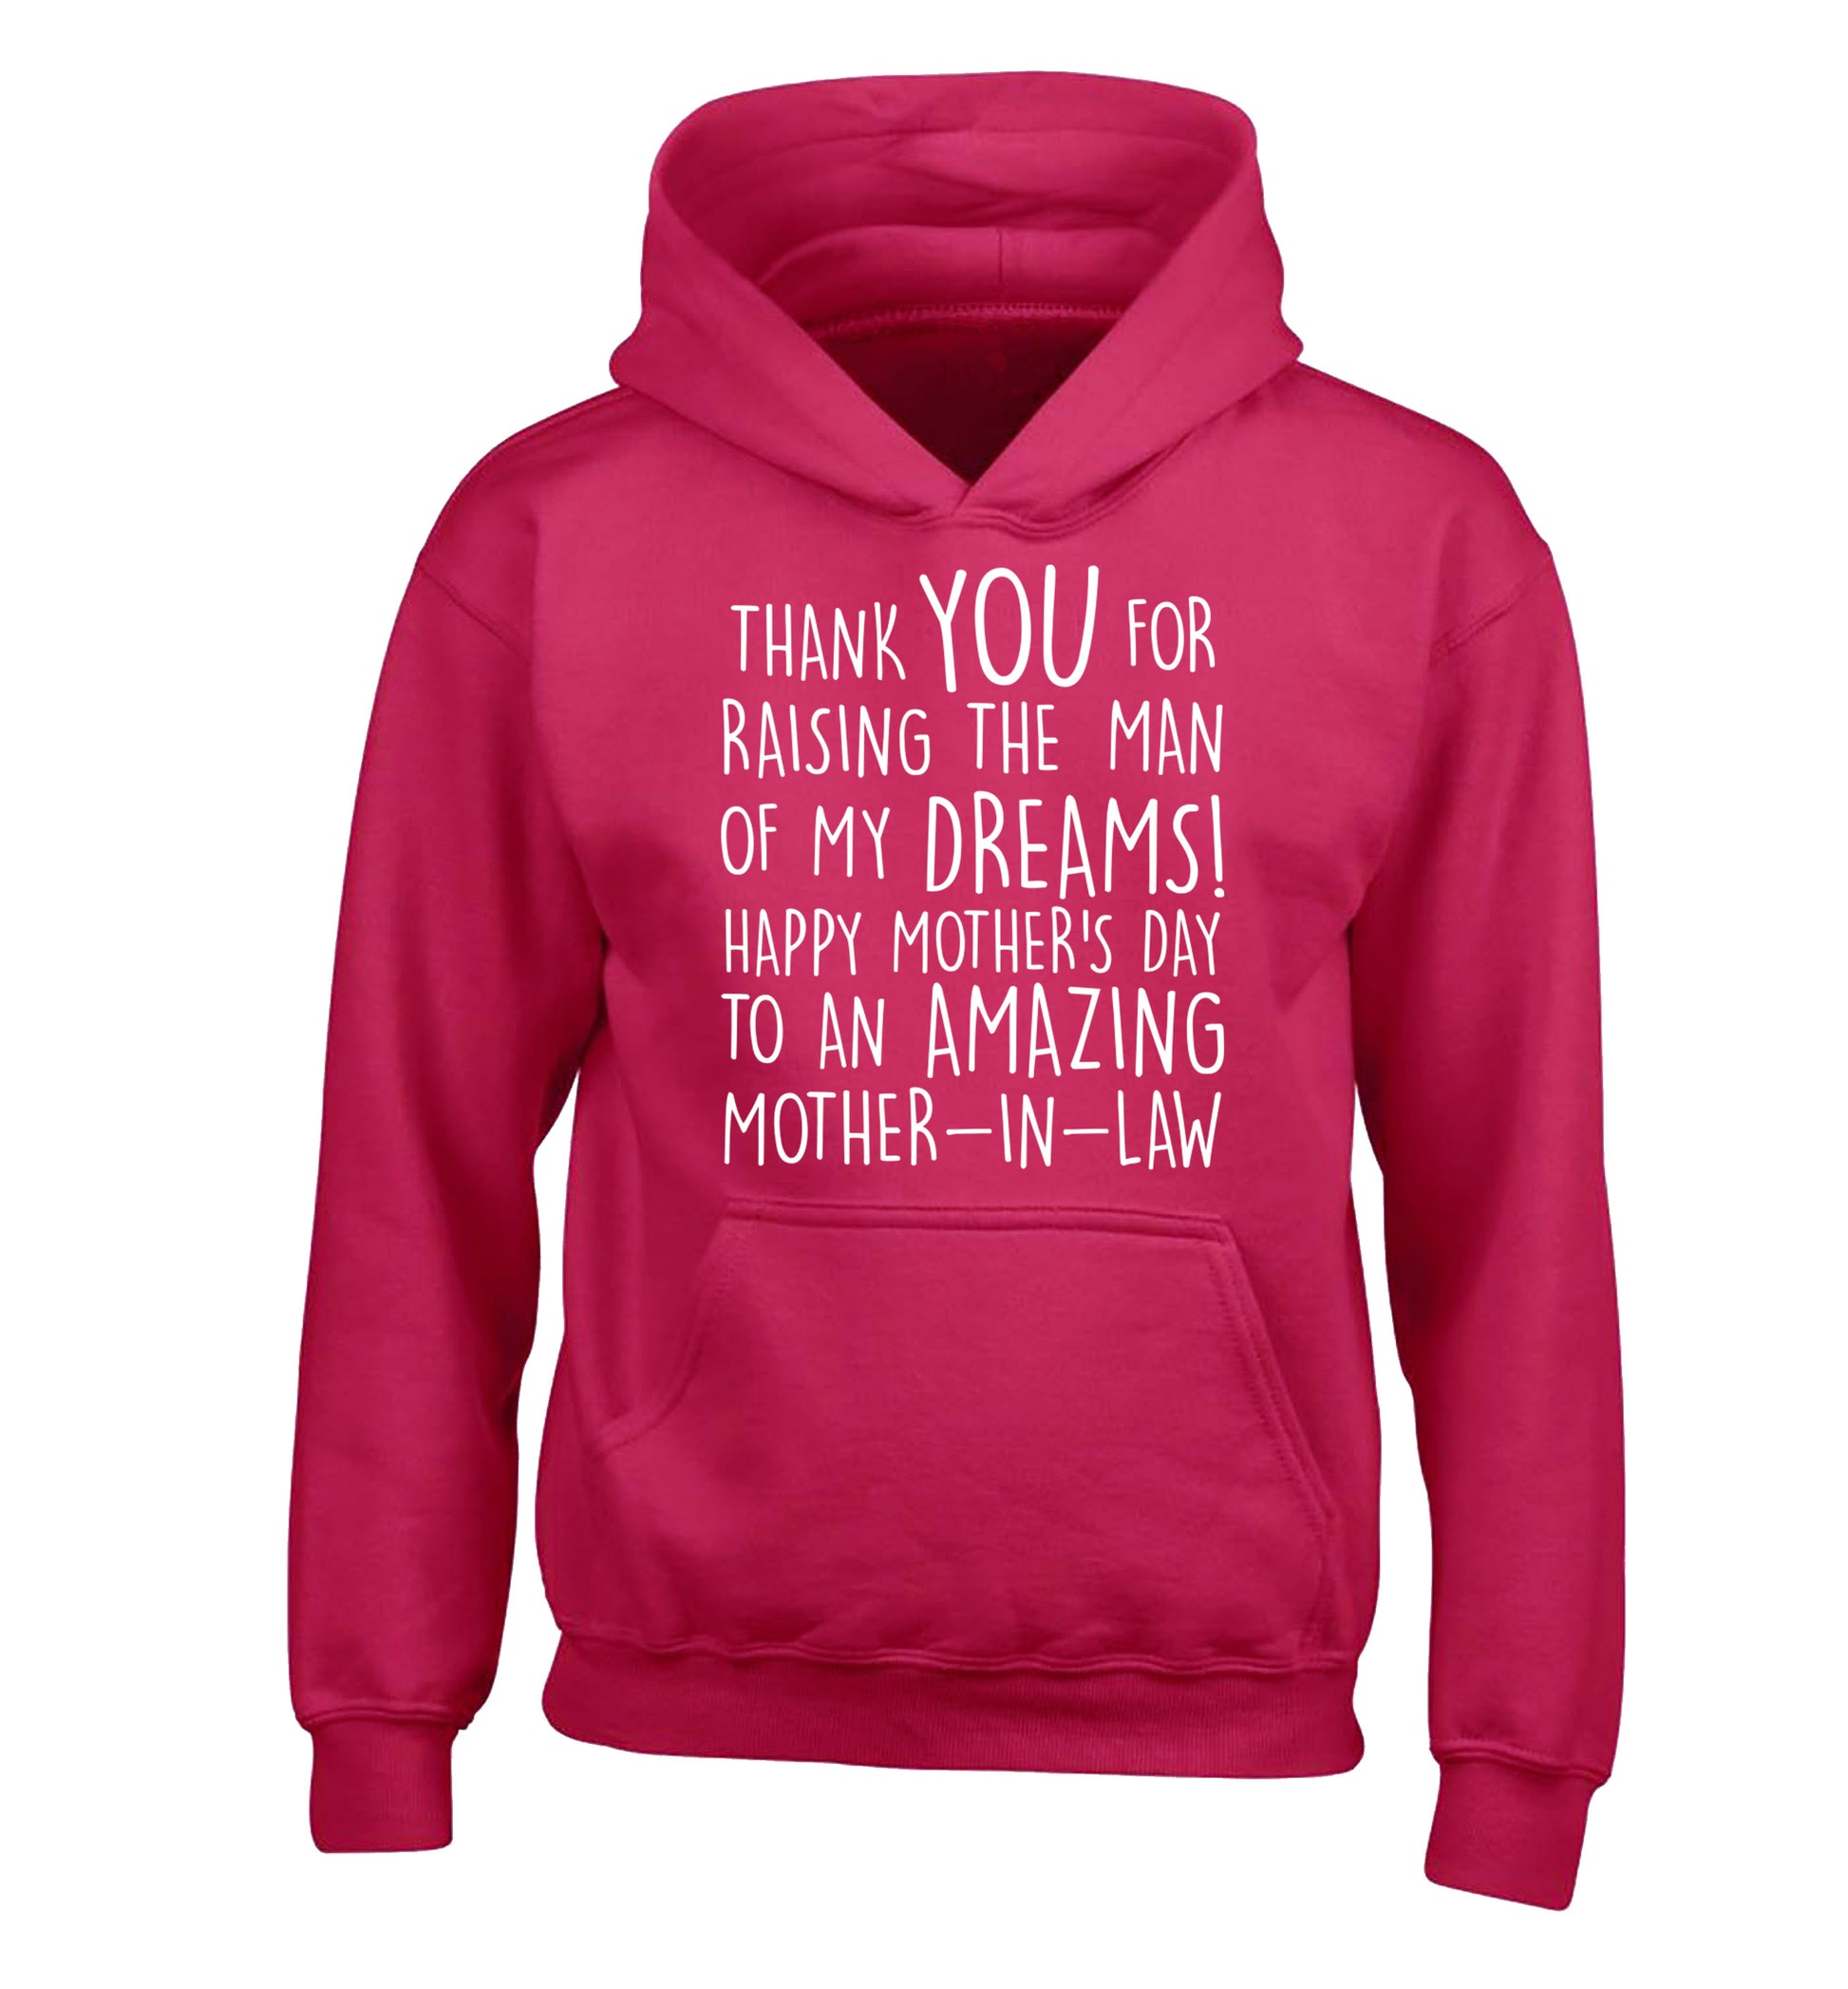 Thank you for raising the man of my dreams happy mother's day mother-in-law children's pink hoodie 12-13 Years